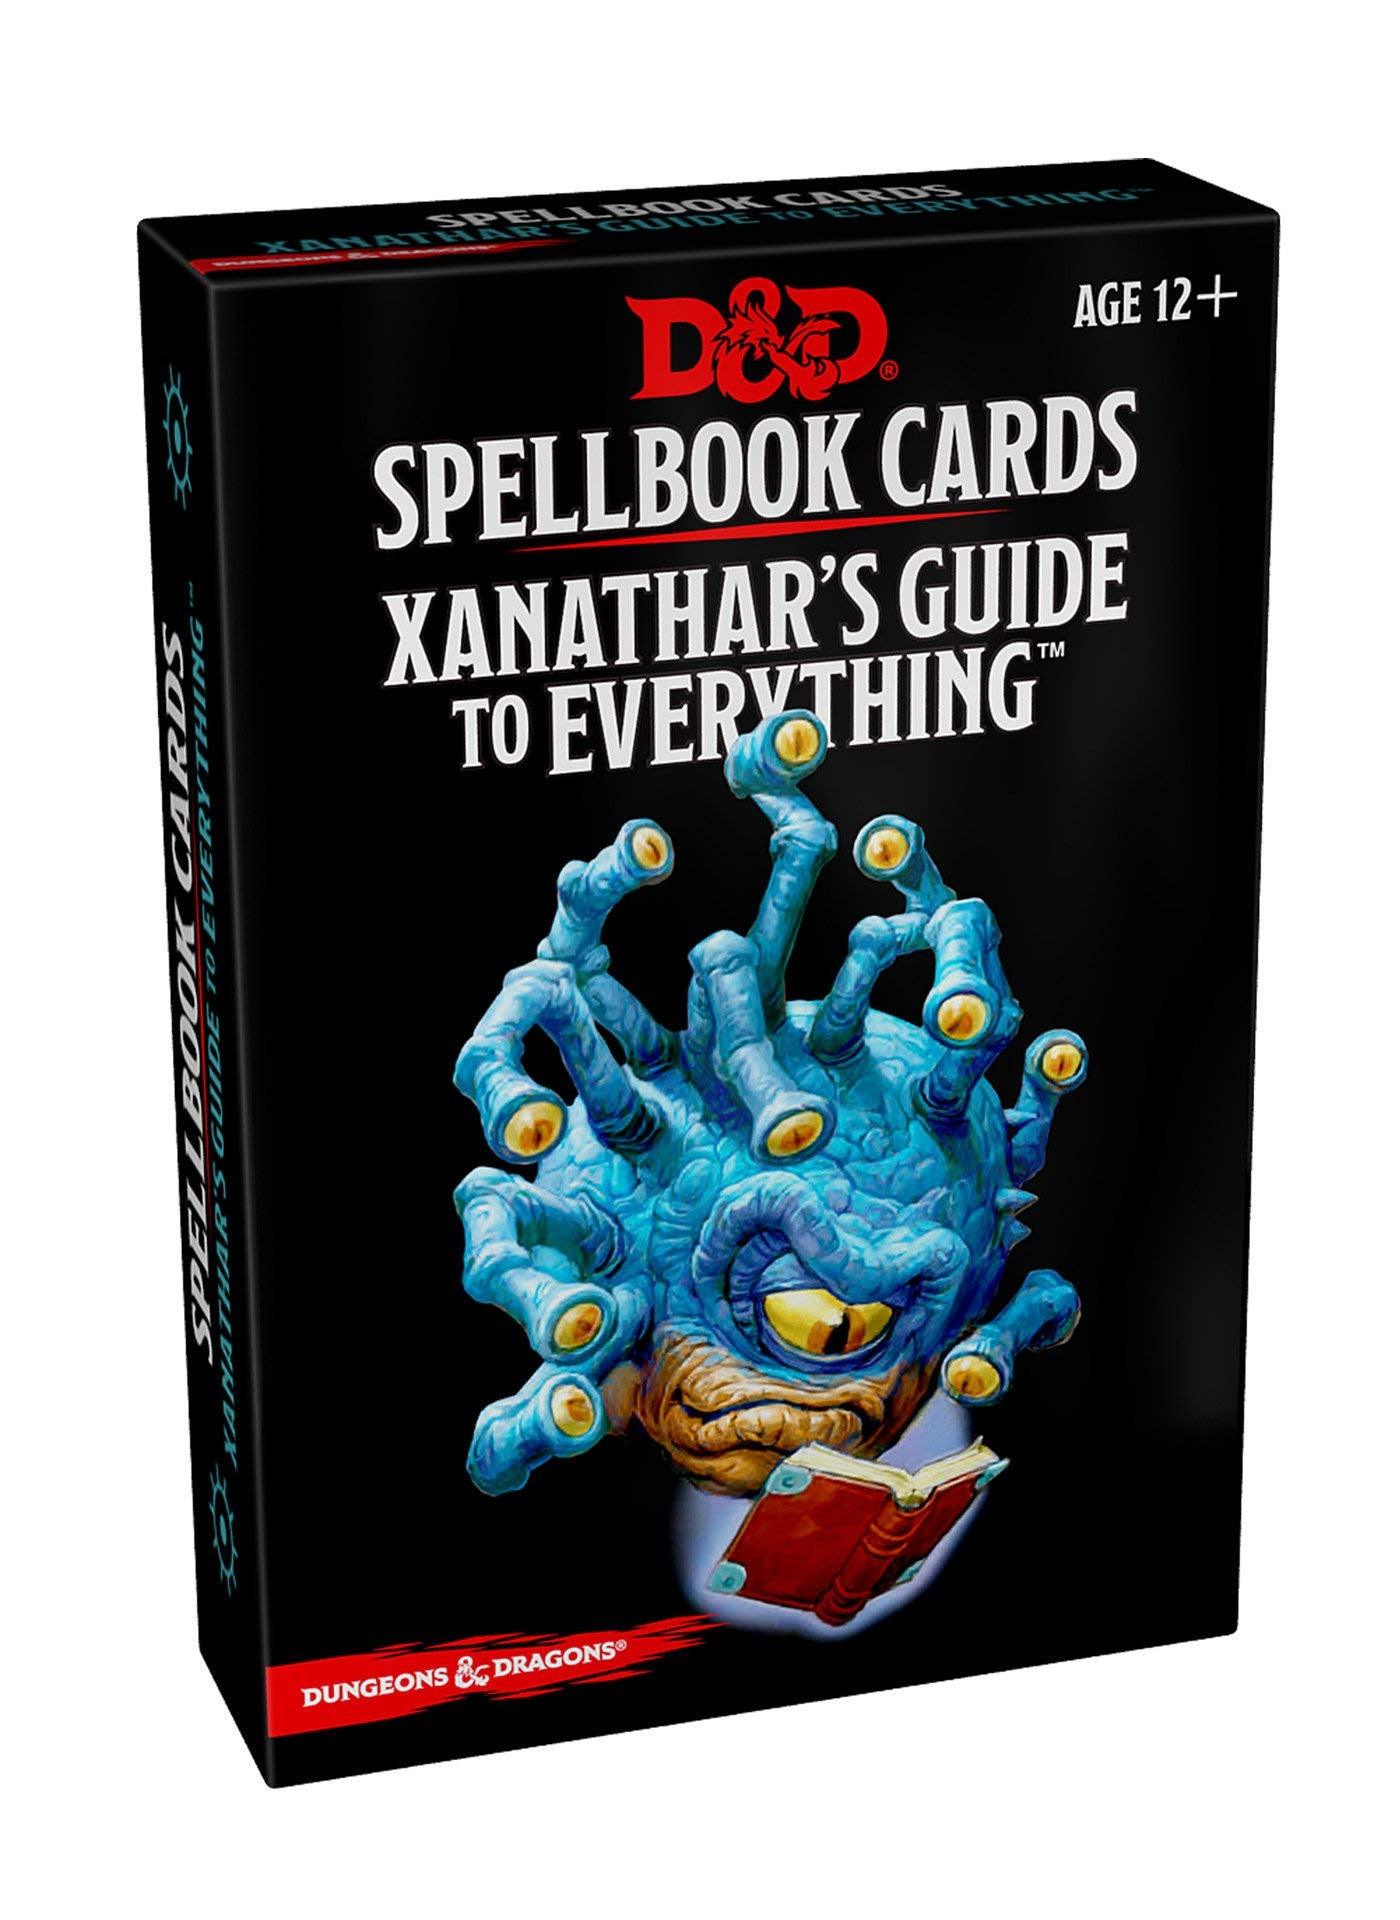 VR-101237 D&D Dungeons & Dragons Spellbook Cards Xanathars Guide to Everything - Wizards of the Coast - Titan Pop Culture